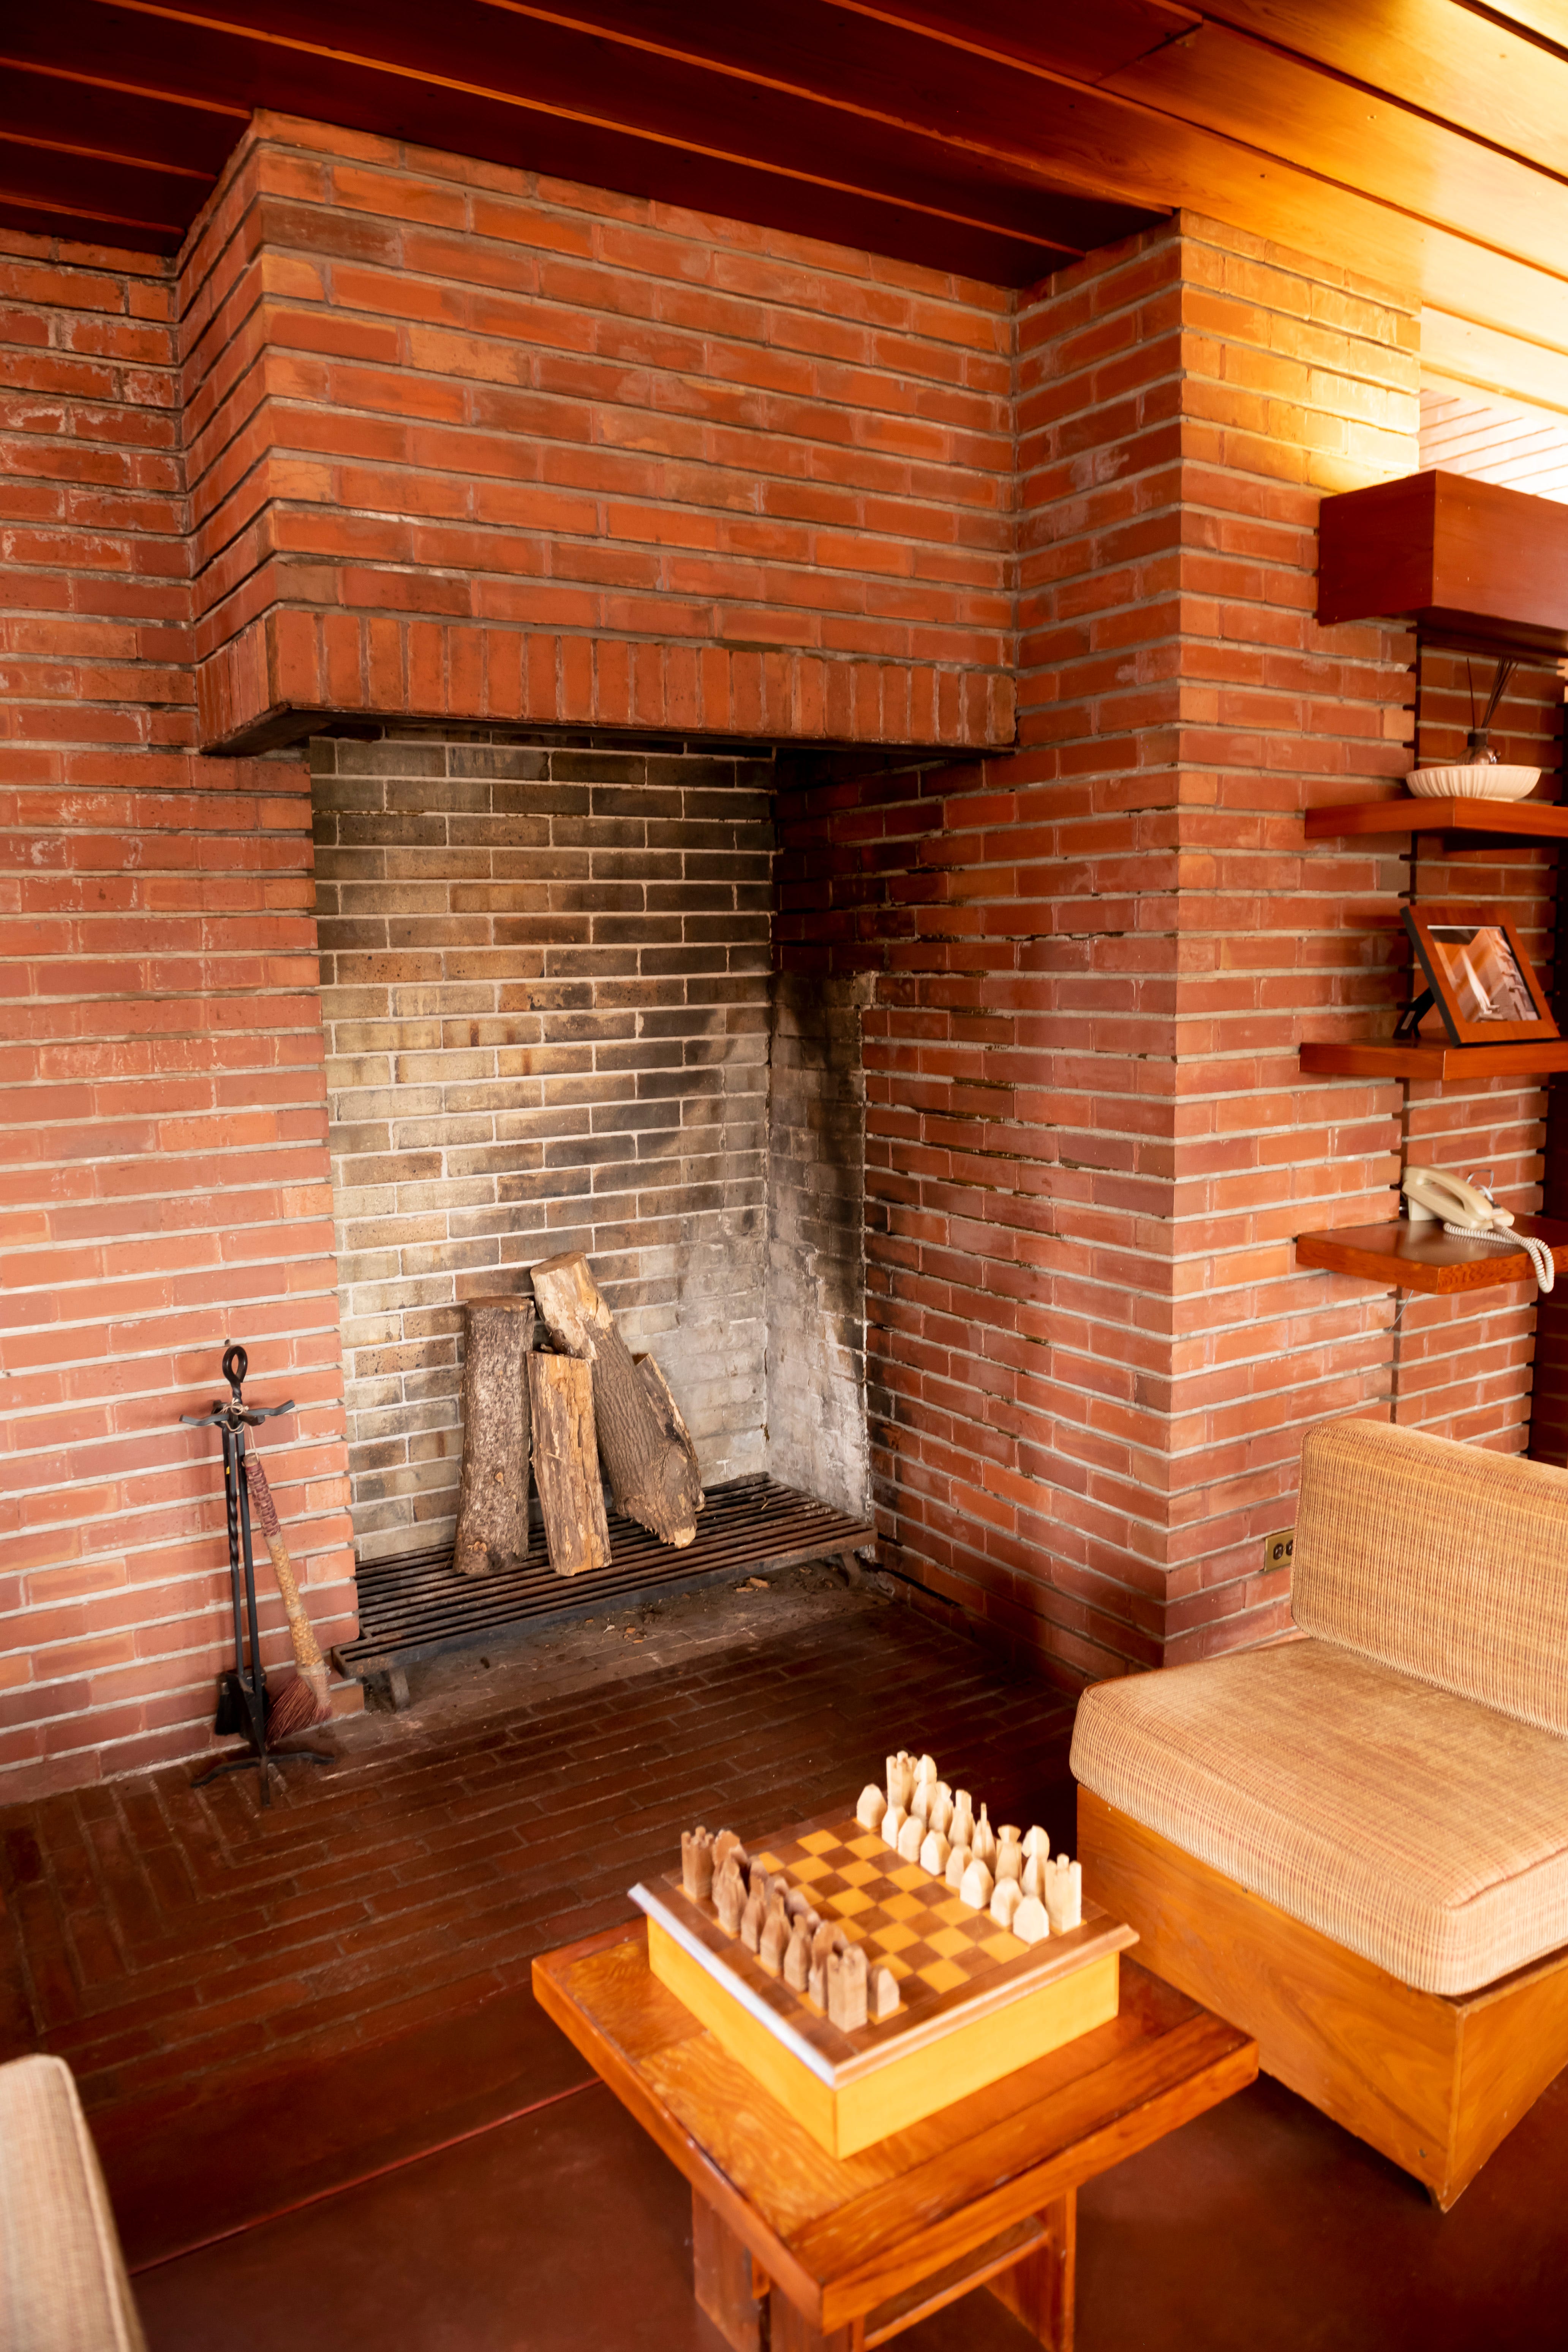 The main living area included a 6-foot-high fireplace designed to hold tall logs vertically.